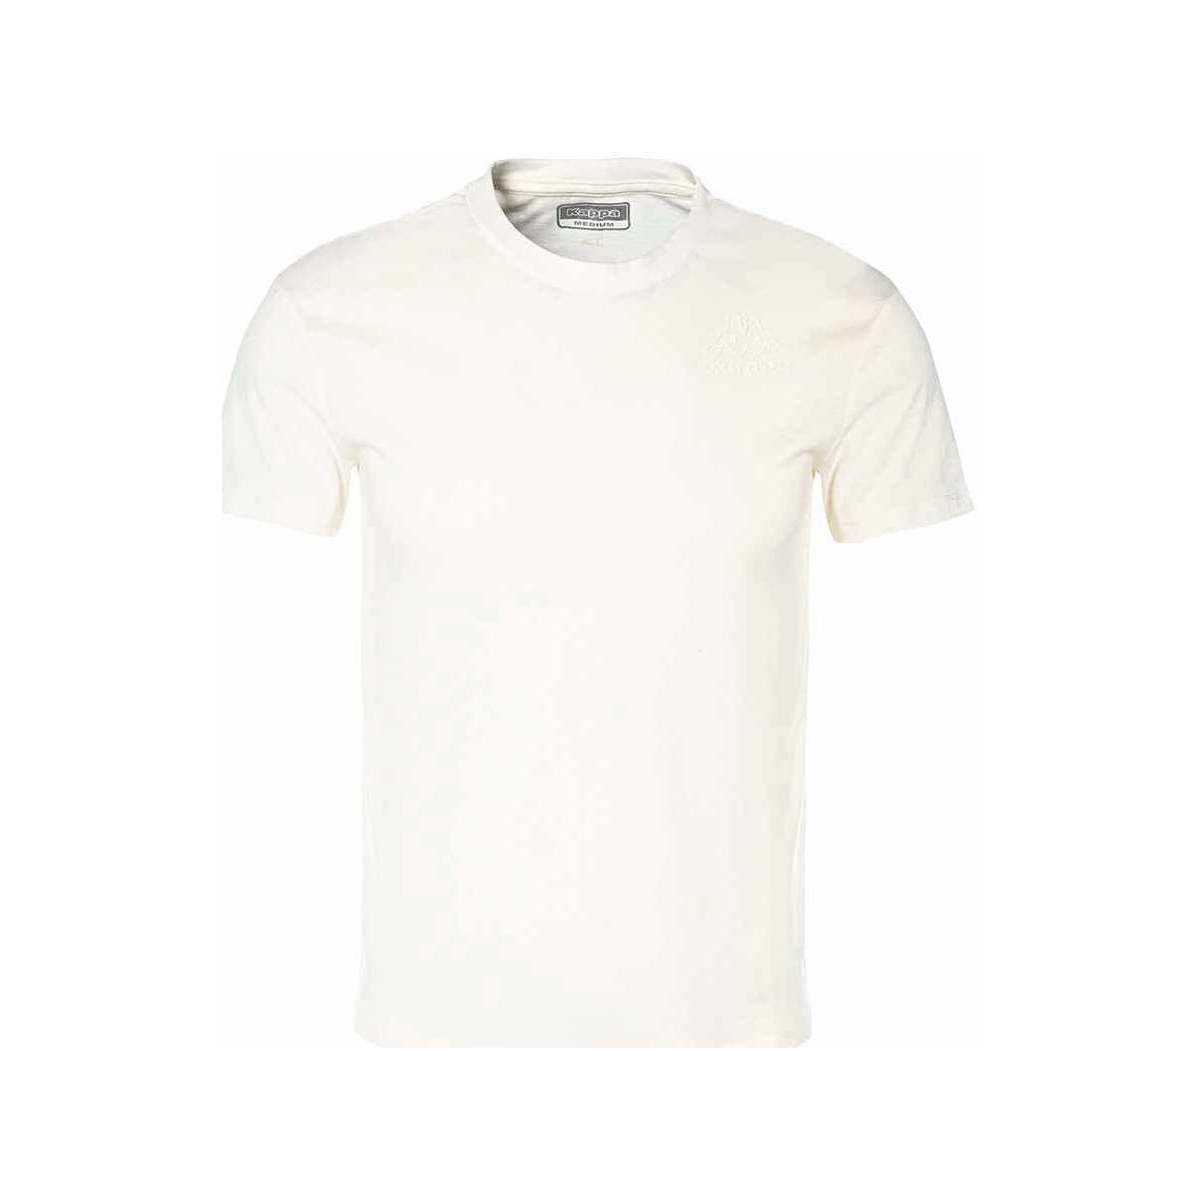 Vêtements Femme Nike Sportswear has an upcoming Curtains Pack that includes the T-shirt  Dishirt Blanc